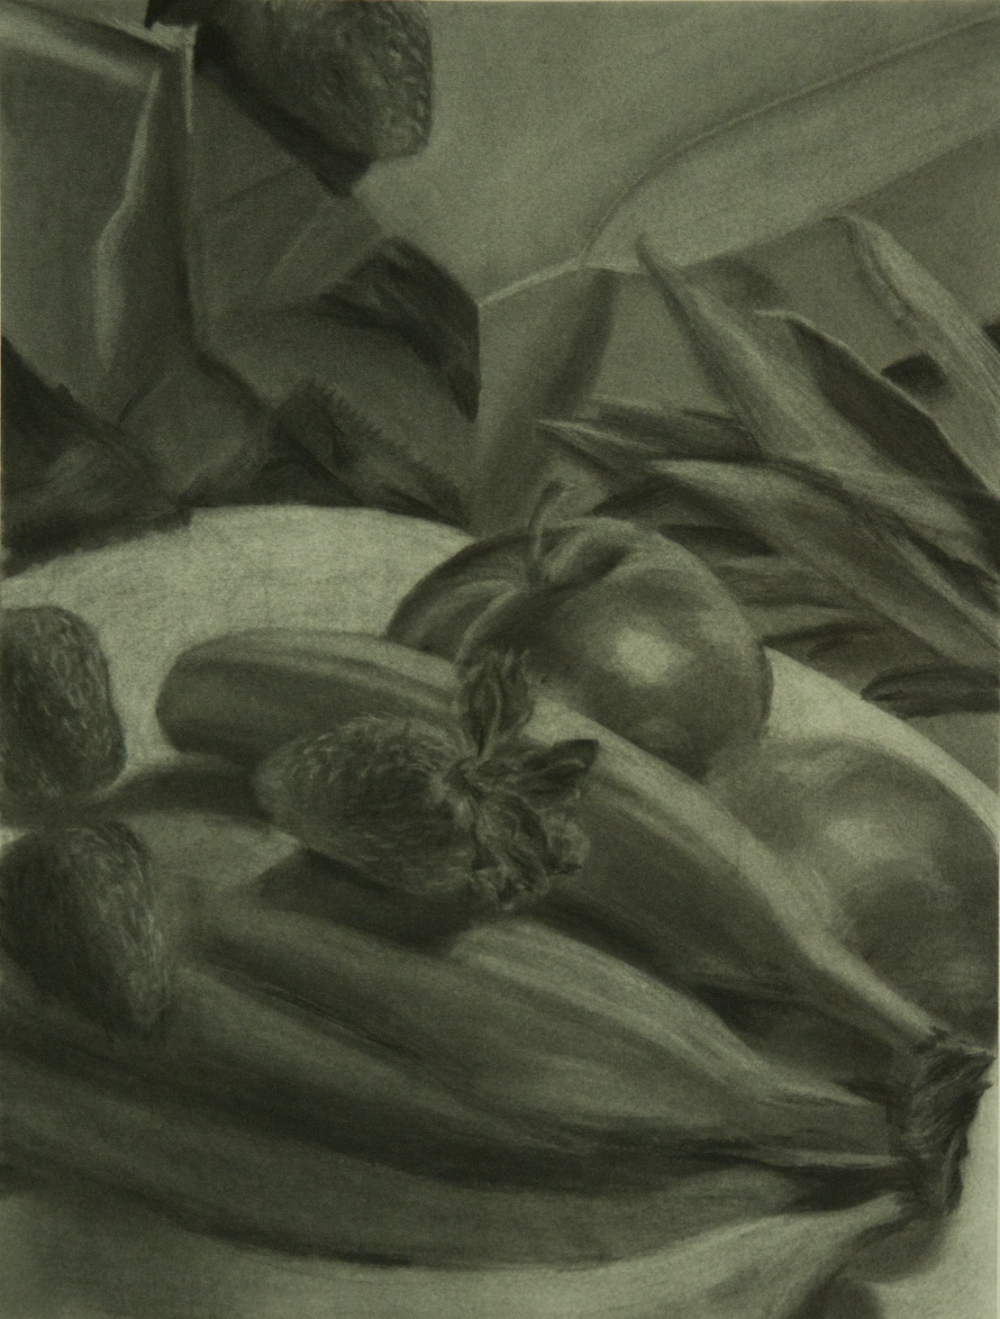 thumbnail of Untitled by Yelitza Galan. medium: charcoal. date: 2011. dimensions: 18 x 24 inches